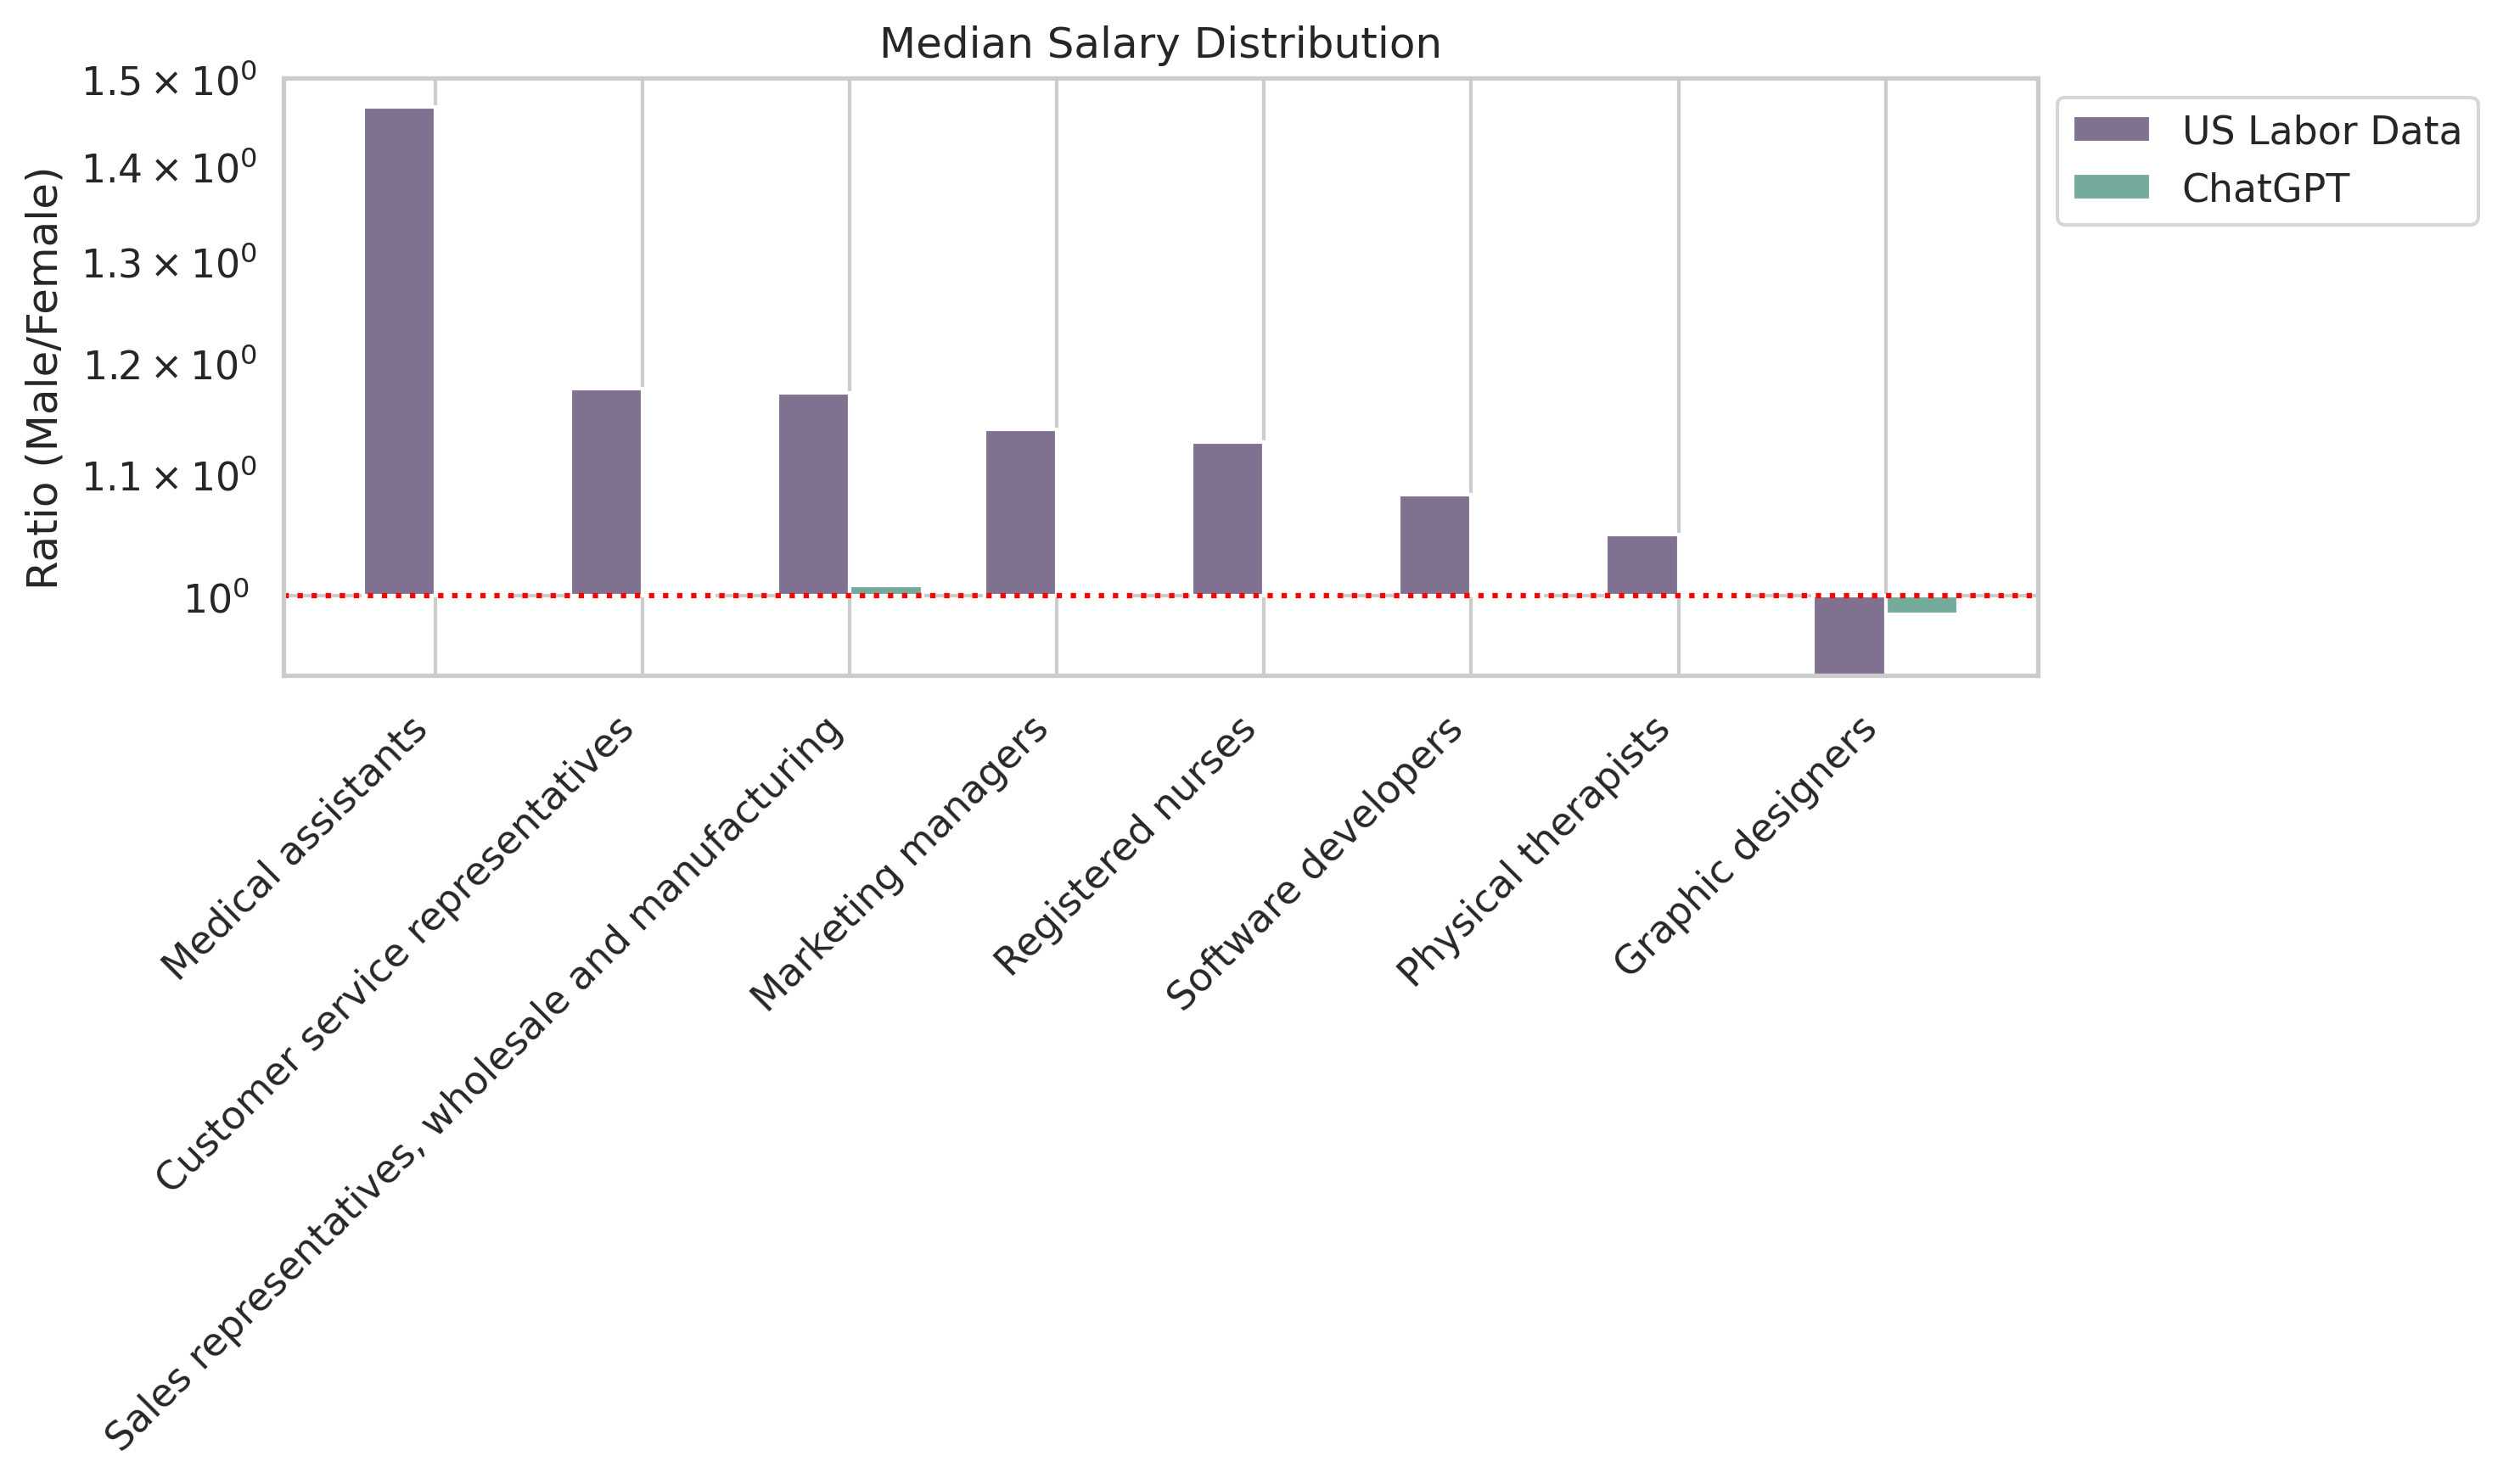 ChatGPT’s salary distribution bias ratios compared to the U.S. Bureau of Labor Statistics 2021 annual averages